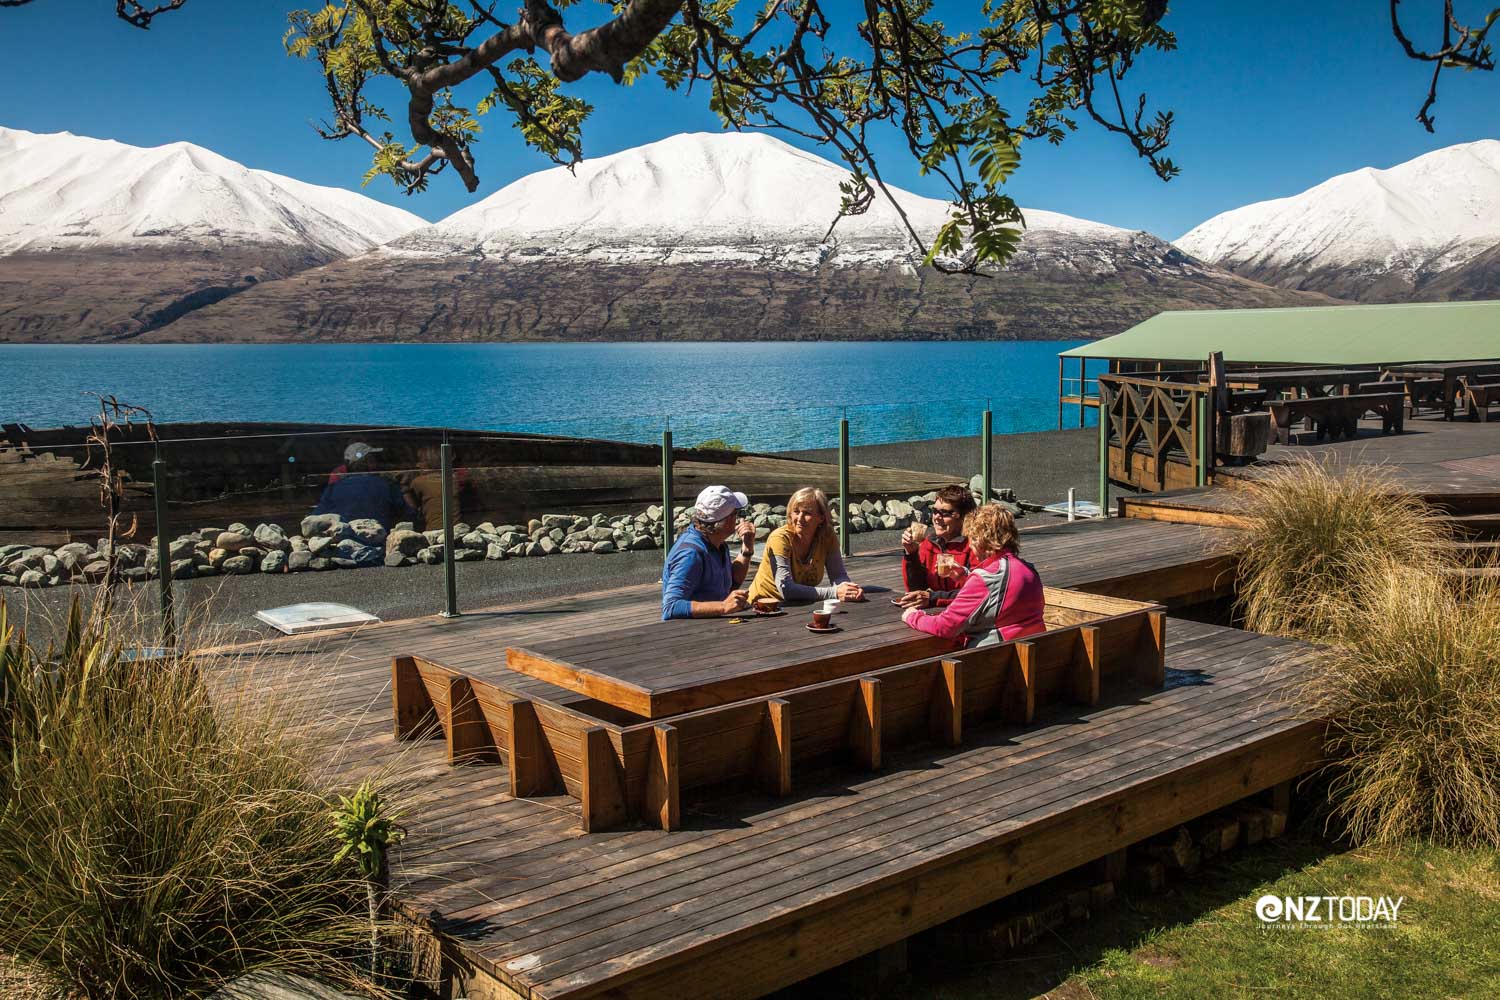 Lake Ohau Lodge, an ideal location for lunch and taking in the spectacular views